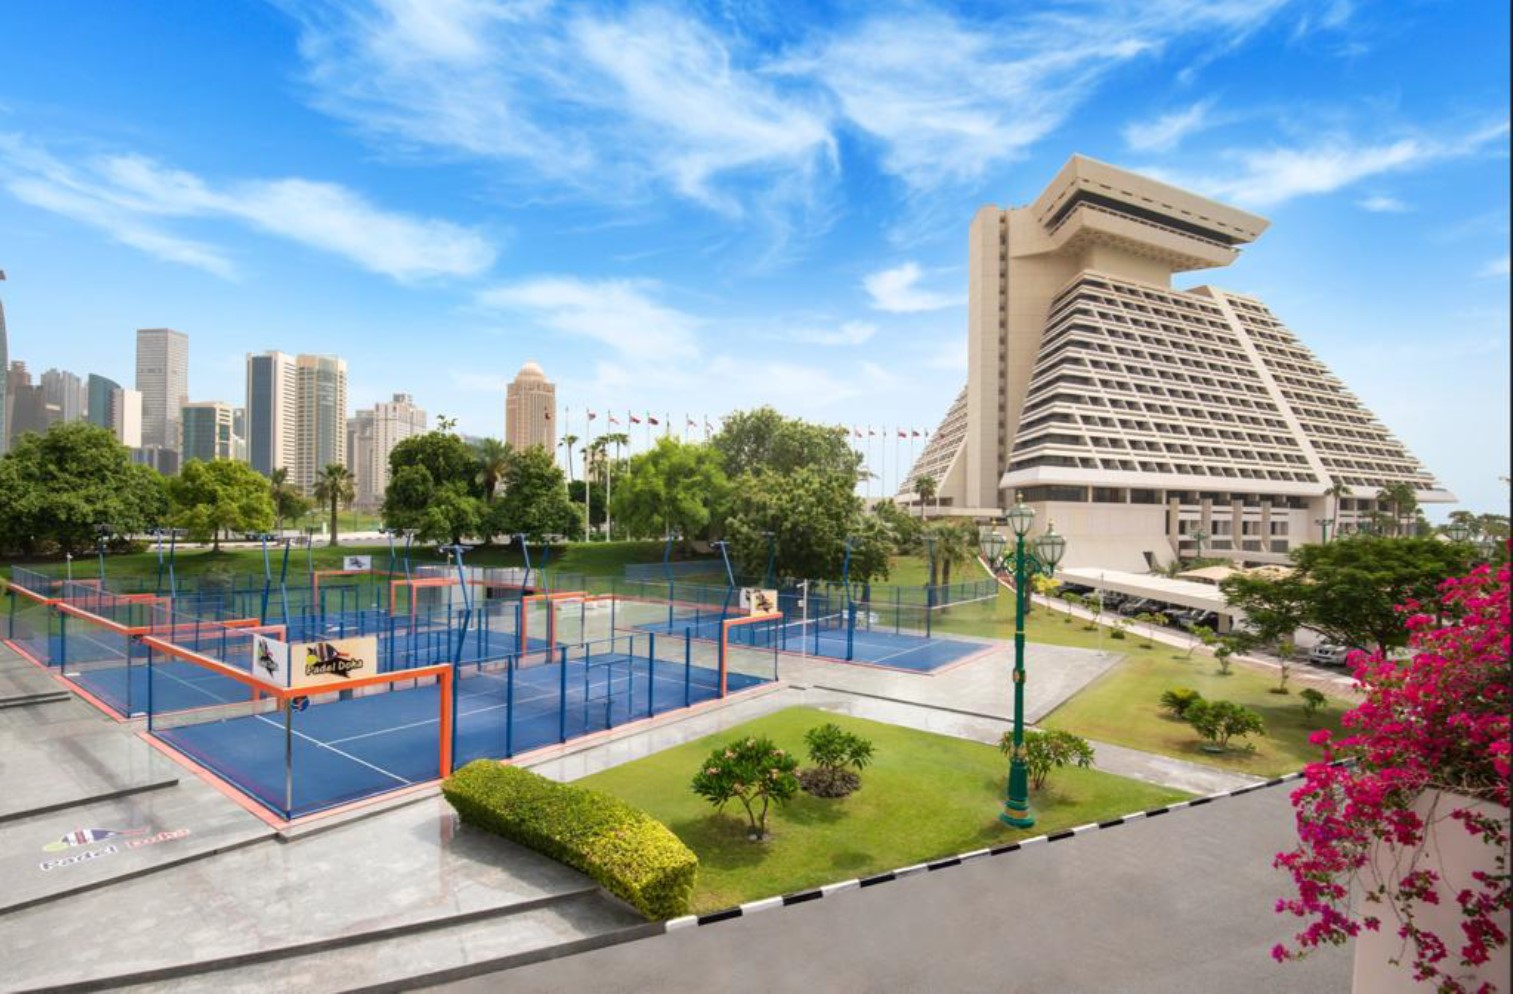 An artist's rendering of several padel courts with fenced perimeters. They are next to a modern multi-storey pyramid-shaped building. In the background is a dense cluster of modern high-rise buildings. The courts and building are surrounded by grass and trees. Thin clouds dot the sky.